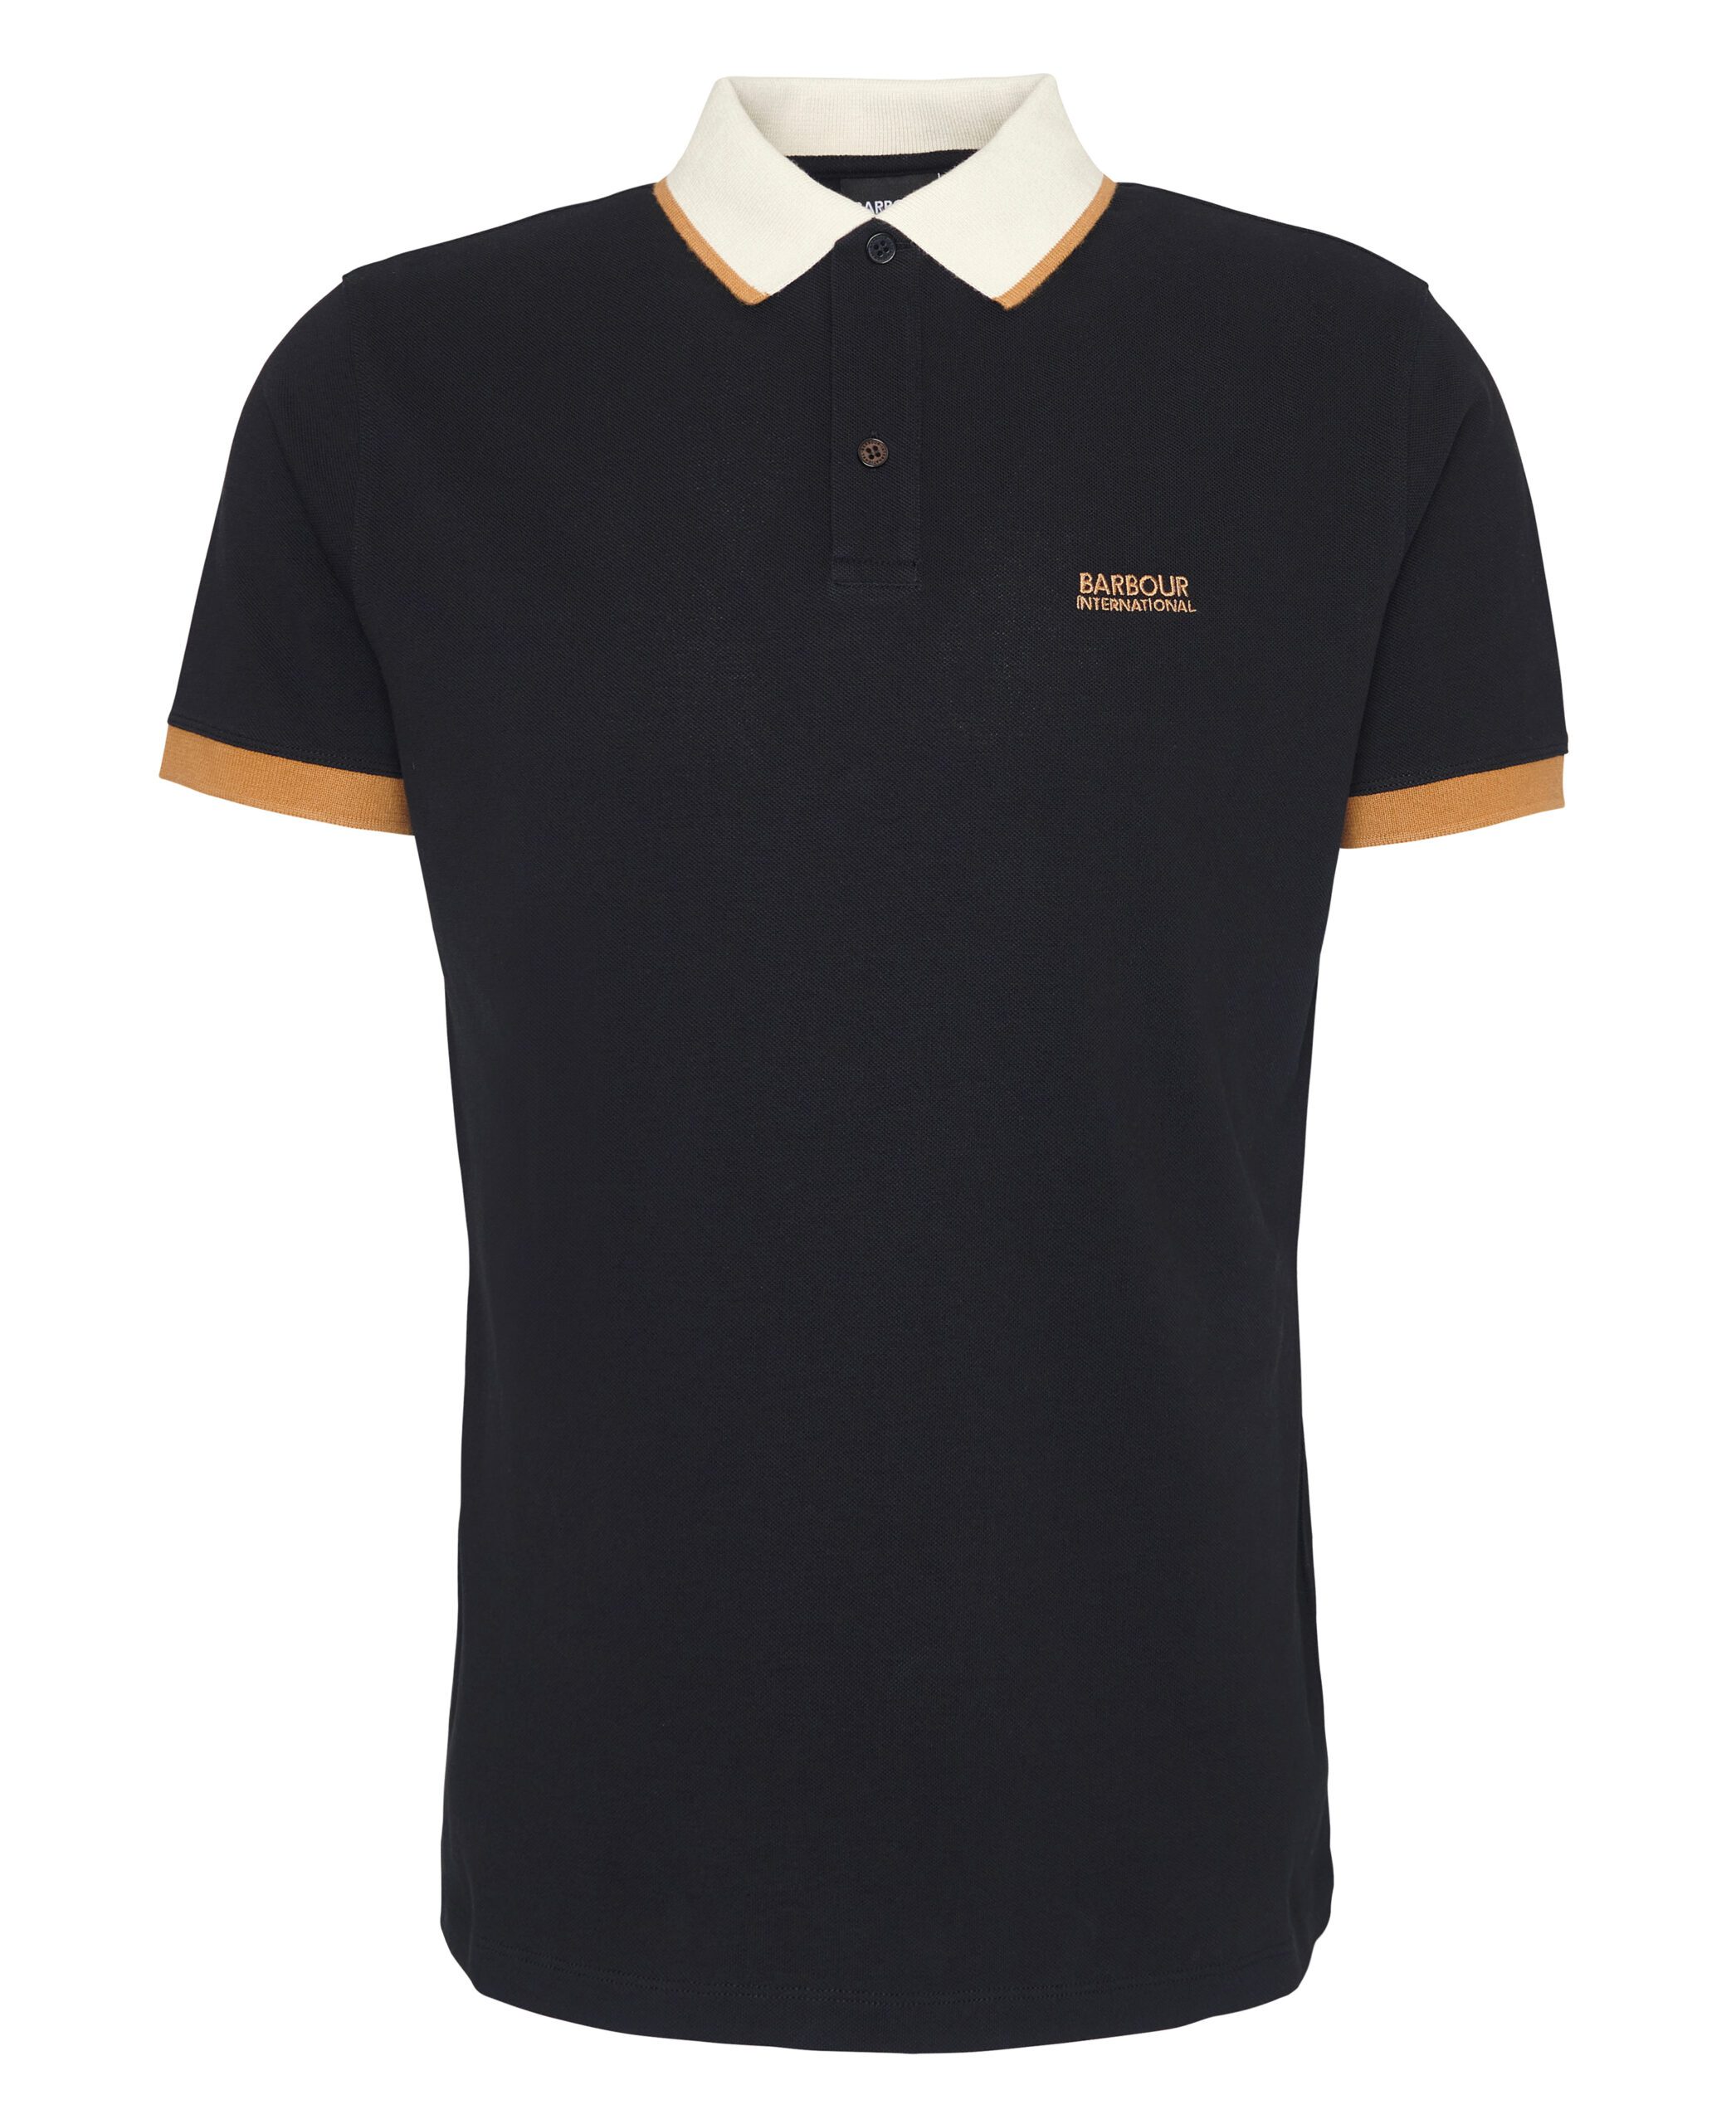 Barbour Barbour International Howall Polo Shirt Black